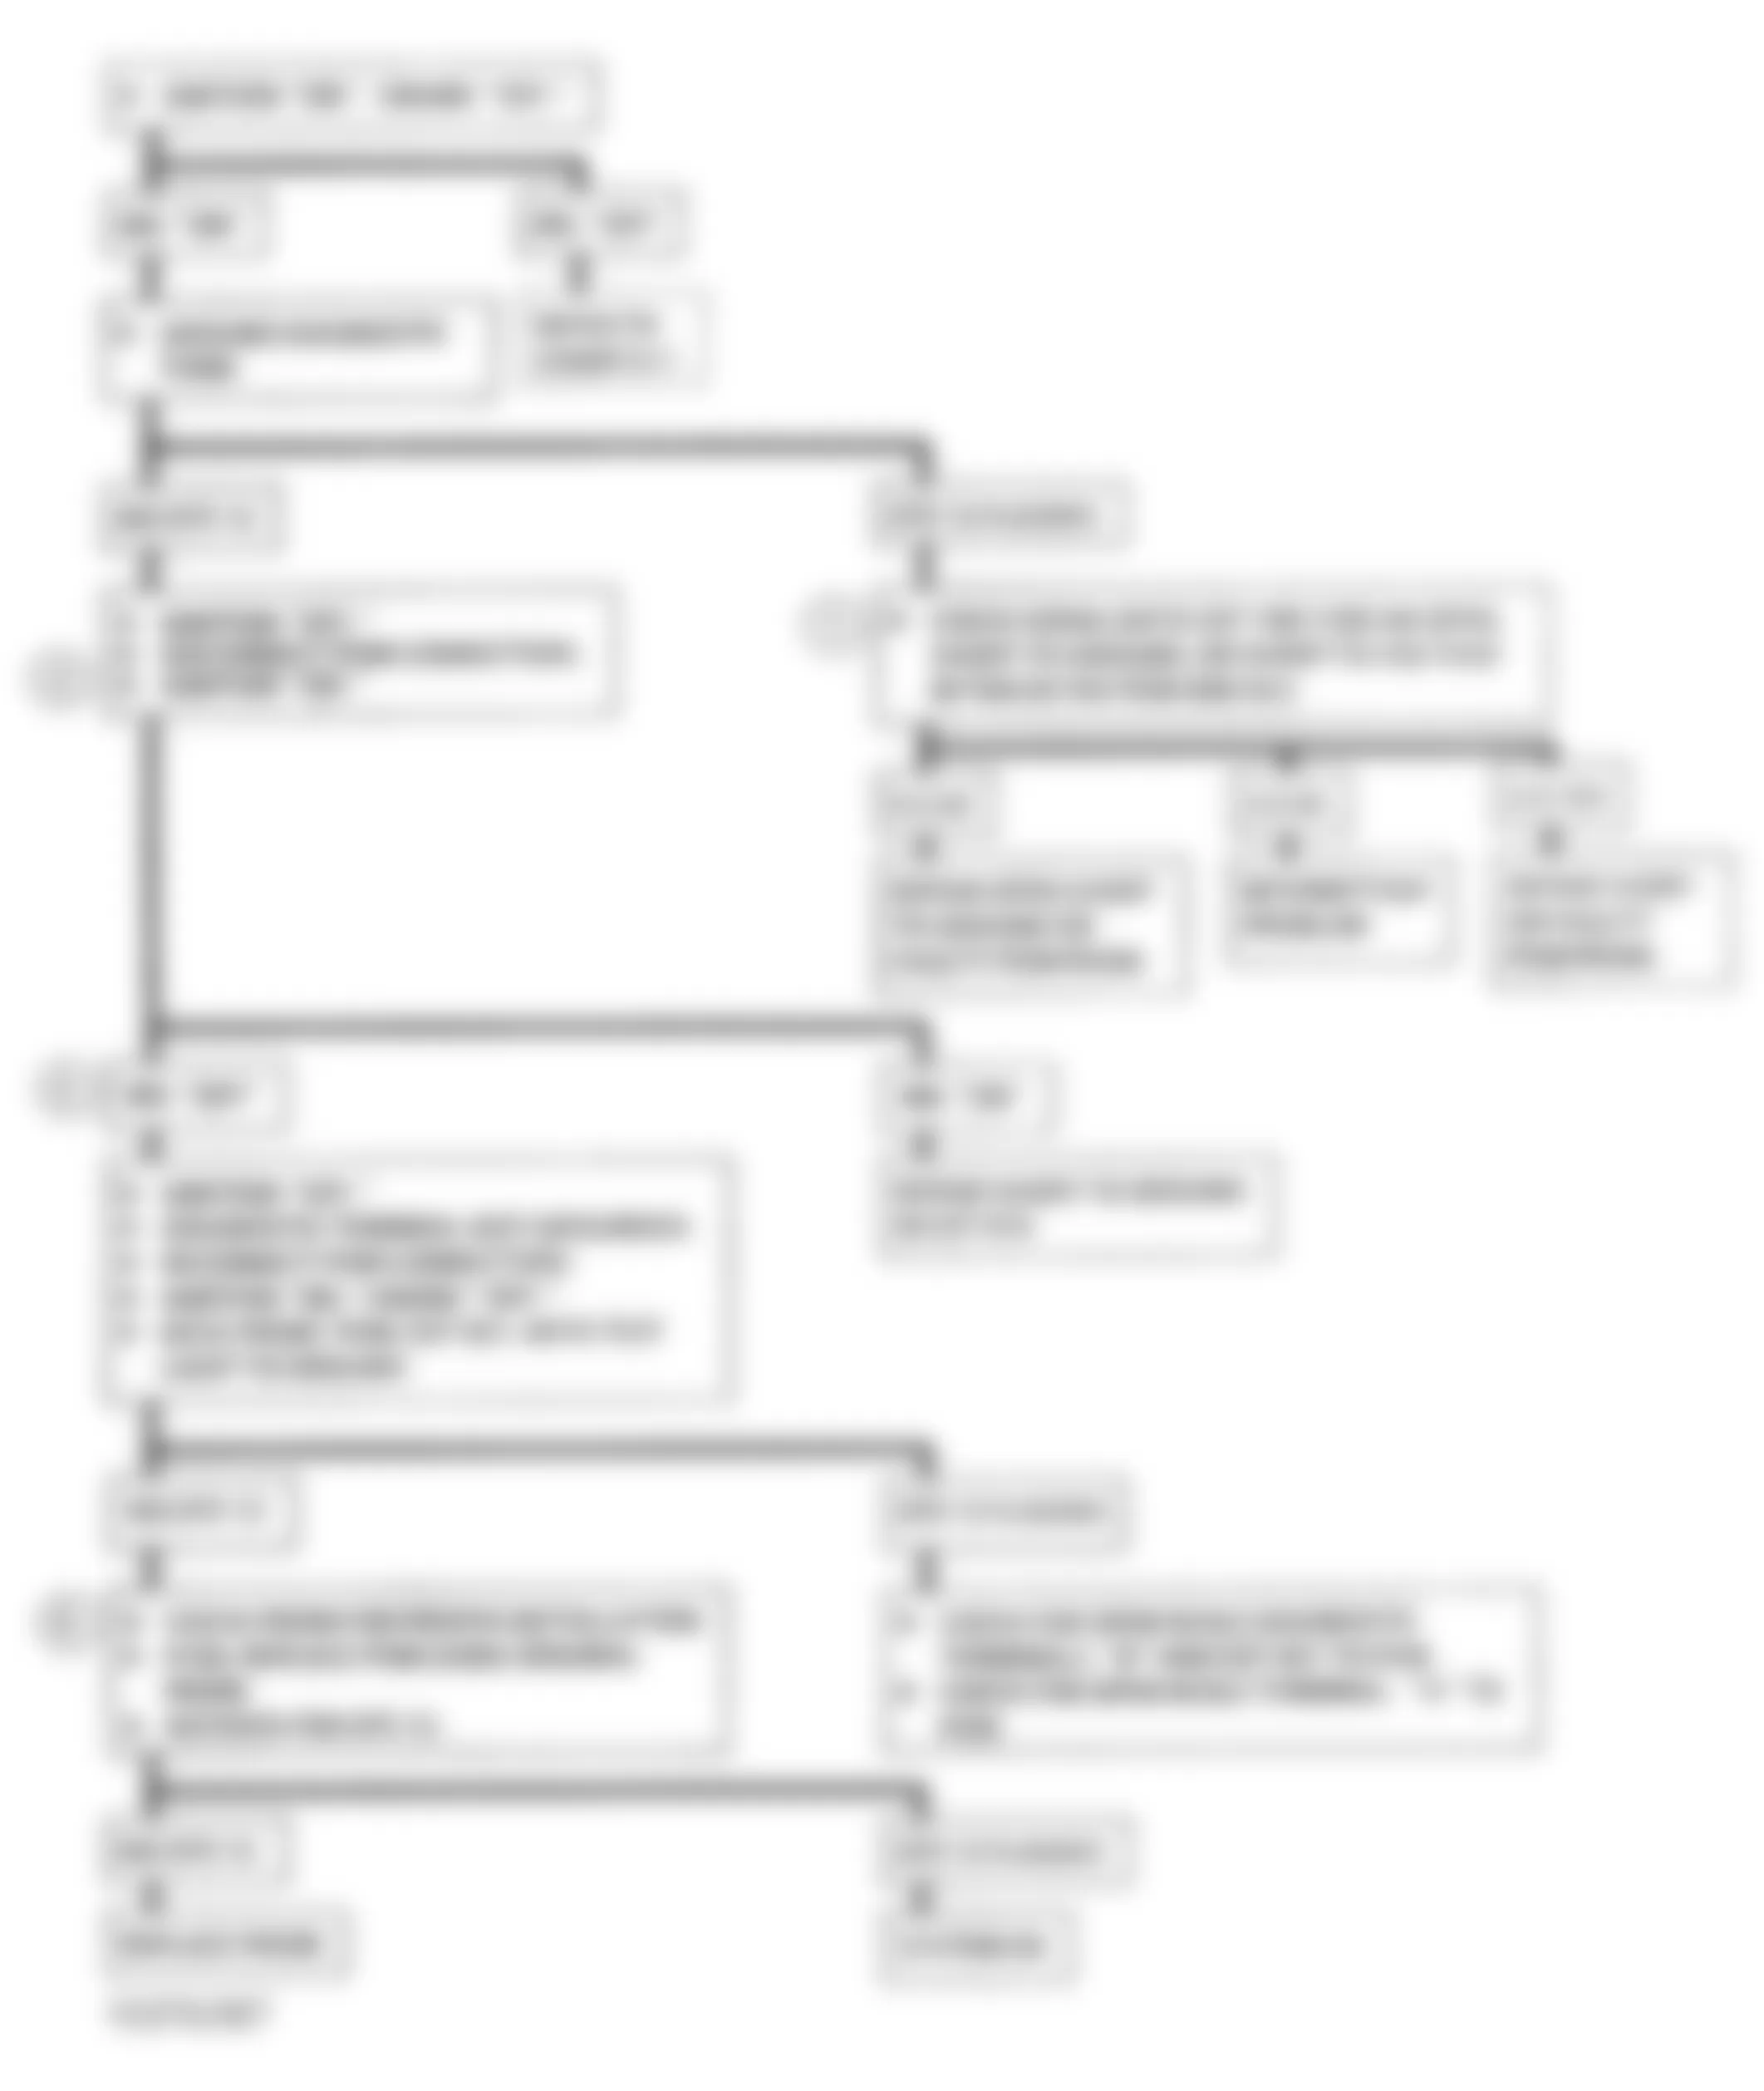 GMC Pickup C2500 1993 - Component Locations -  A-2, Flowchart, No DLC Data, MIL On All Time - A/T